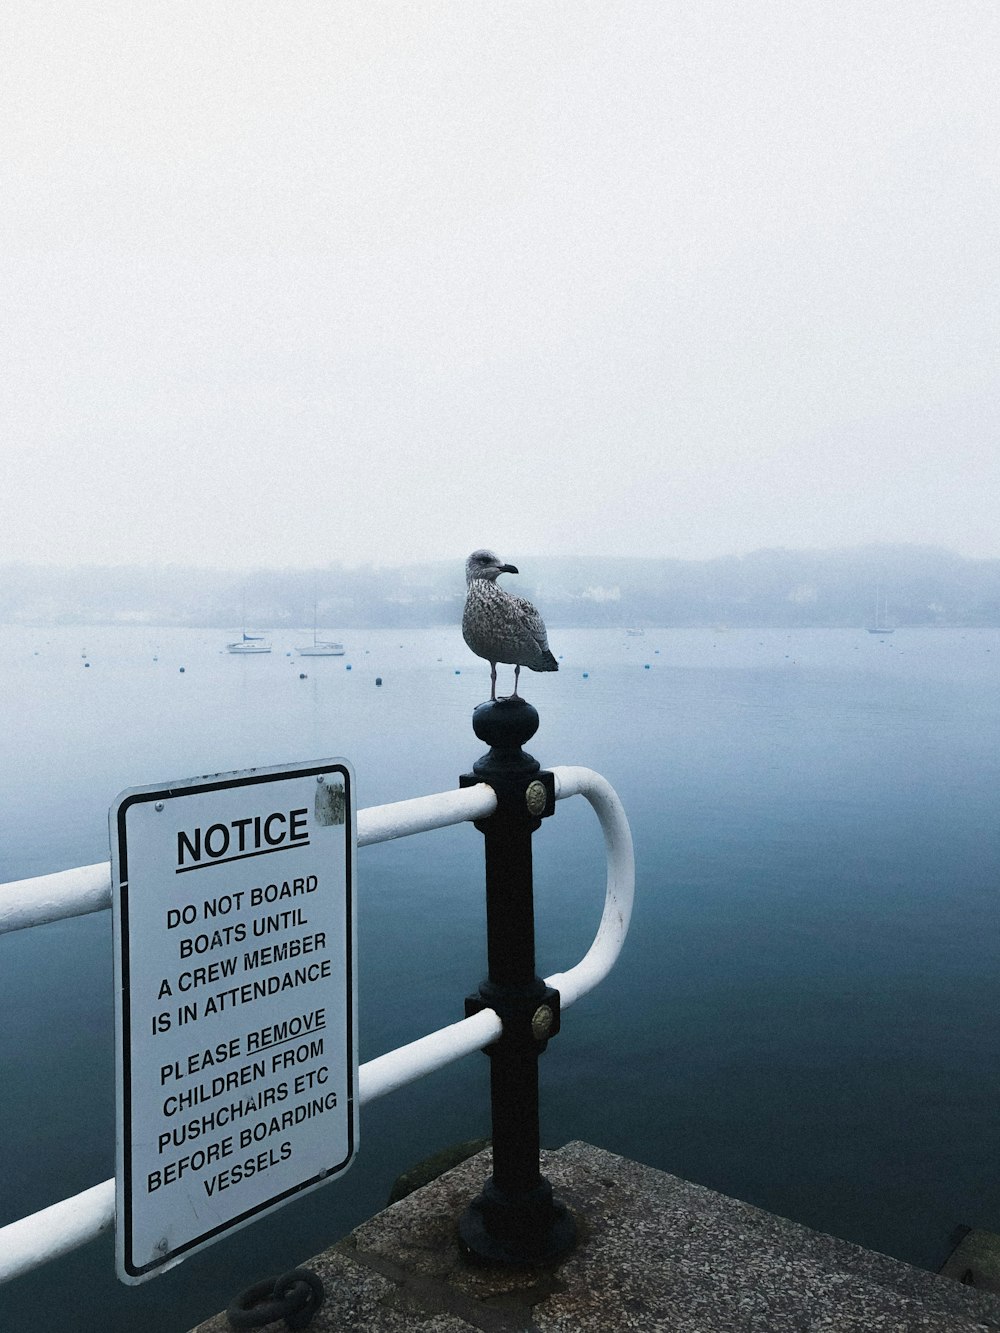 bird perched on white metal railings near body of water during daytime